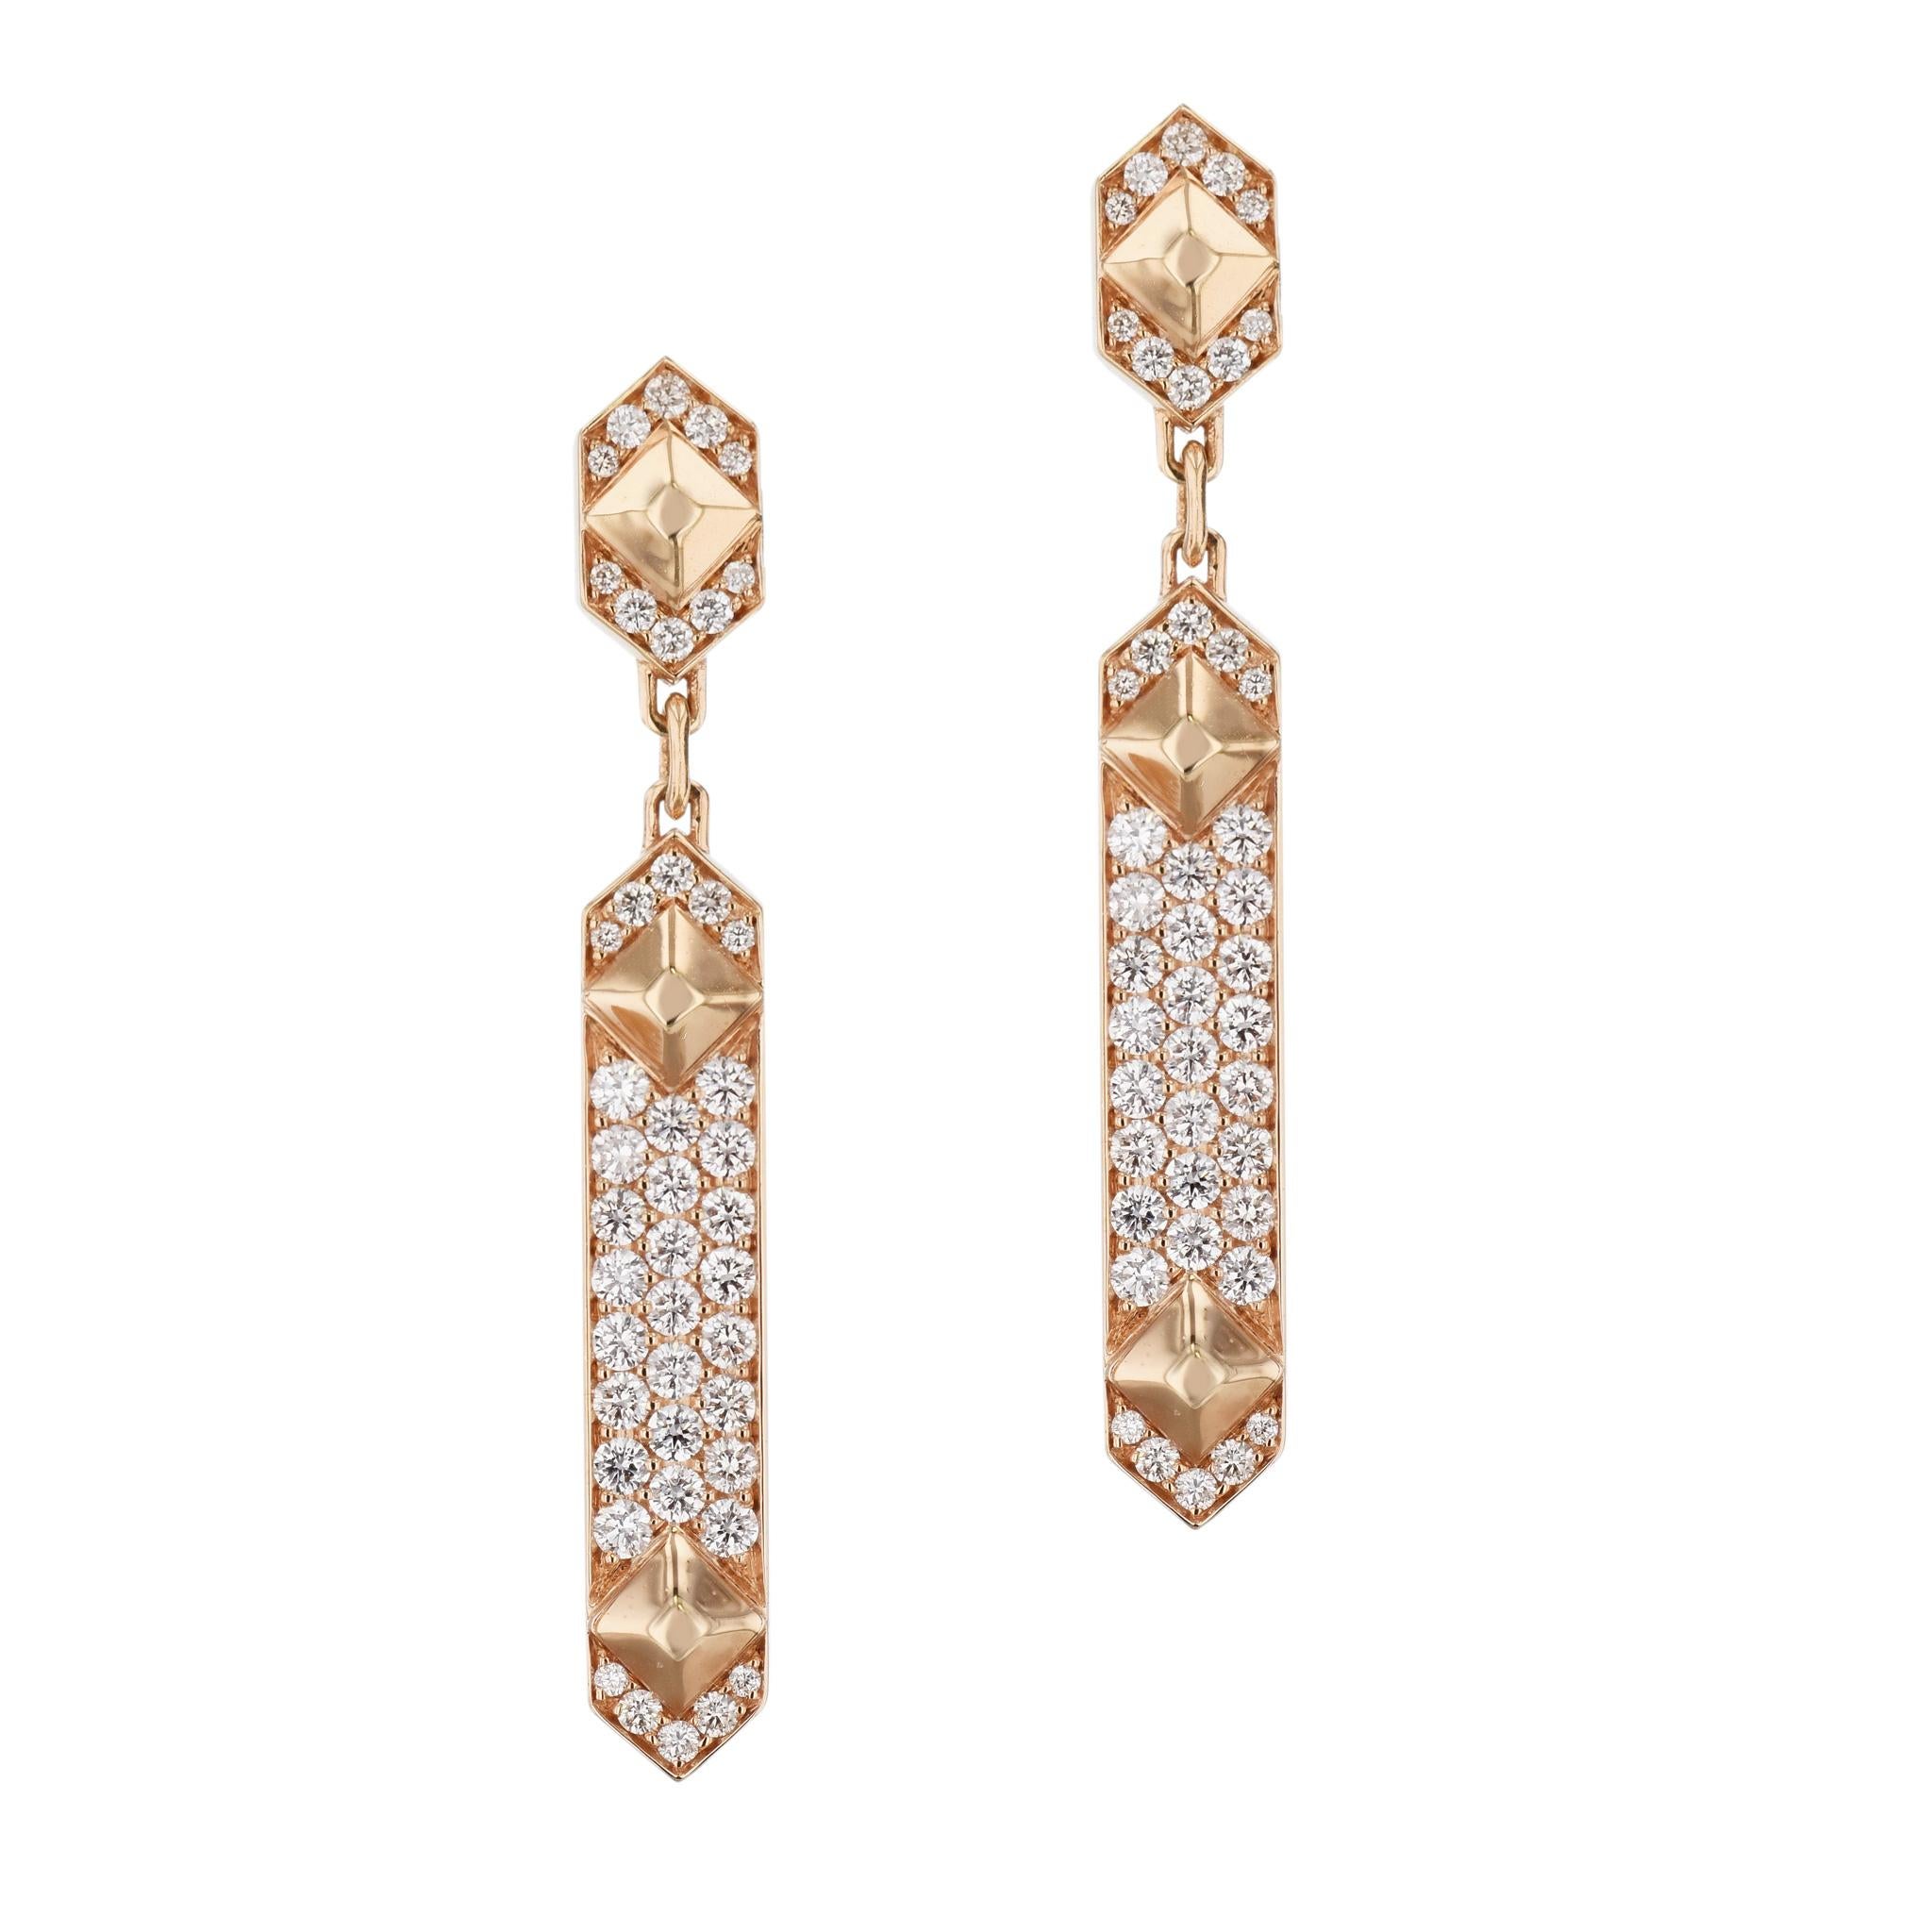 Glimmer with sophistication in these dazzling diamond 18 karat rose gold, drop earrings!

These earrings measure 45 mm long and are 6 mm wide.

These earrings are very versatile. They are easy to wear to dress up an outfit, but could also